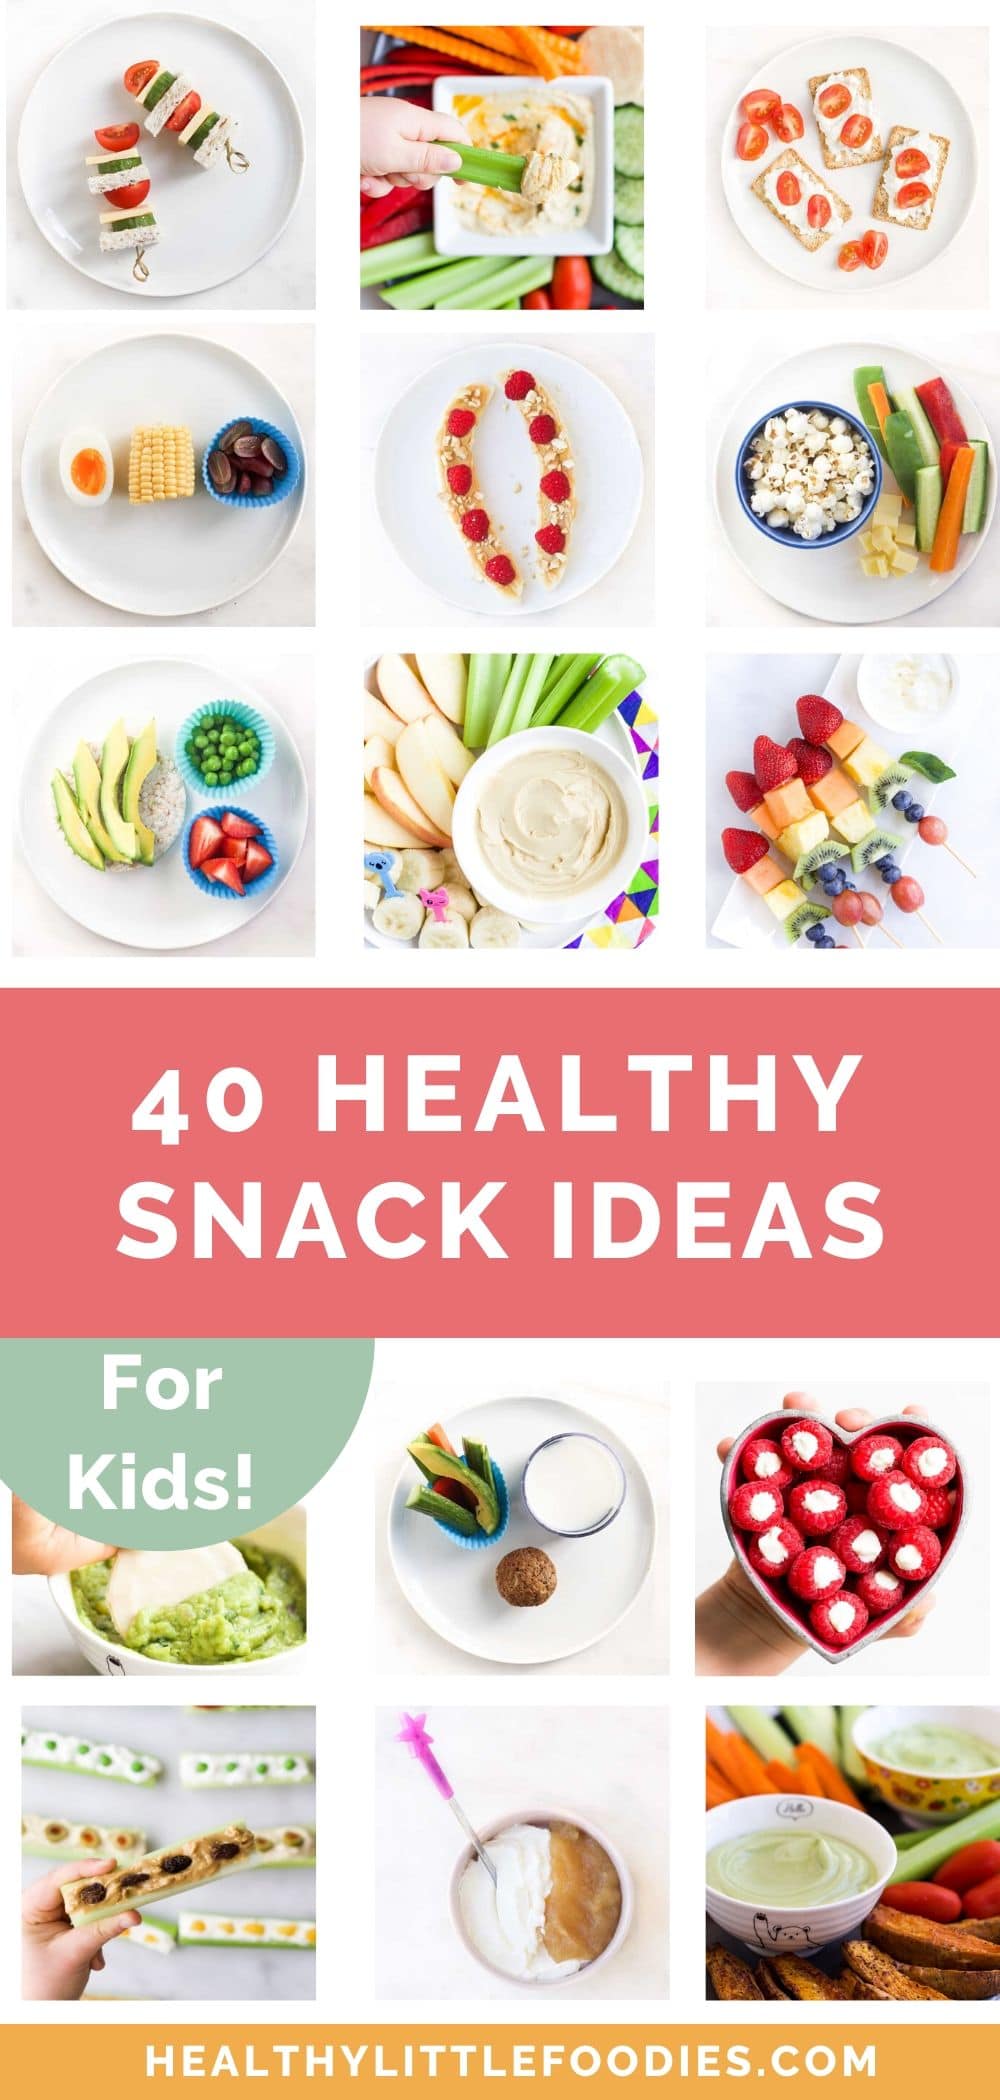 Healthy Snacks for Kids (and Snacking Tips) - Healthy Little Foodies